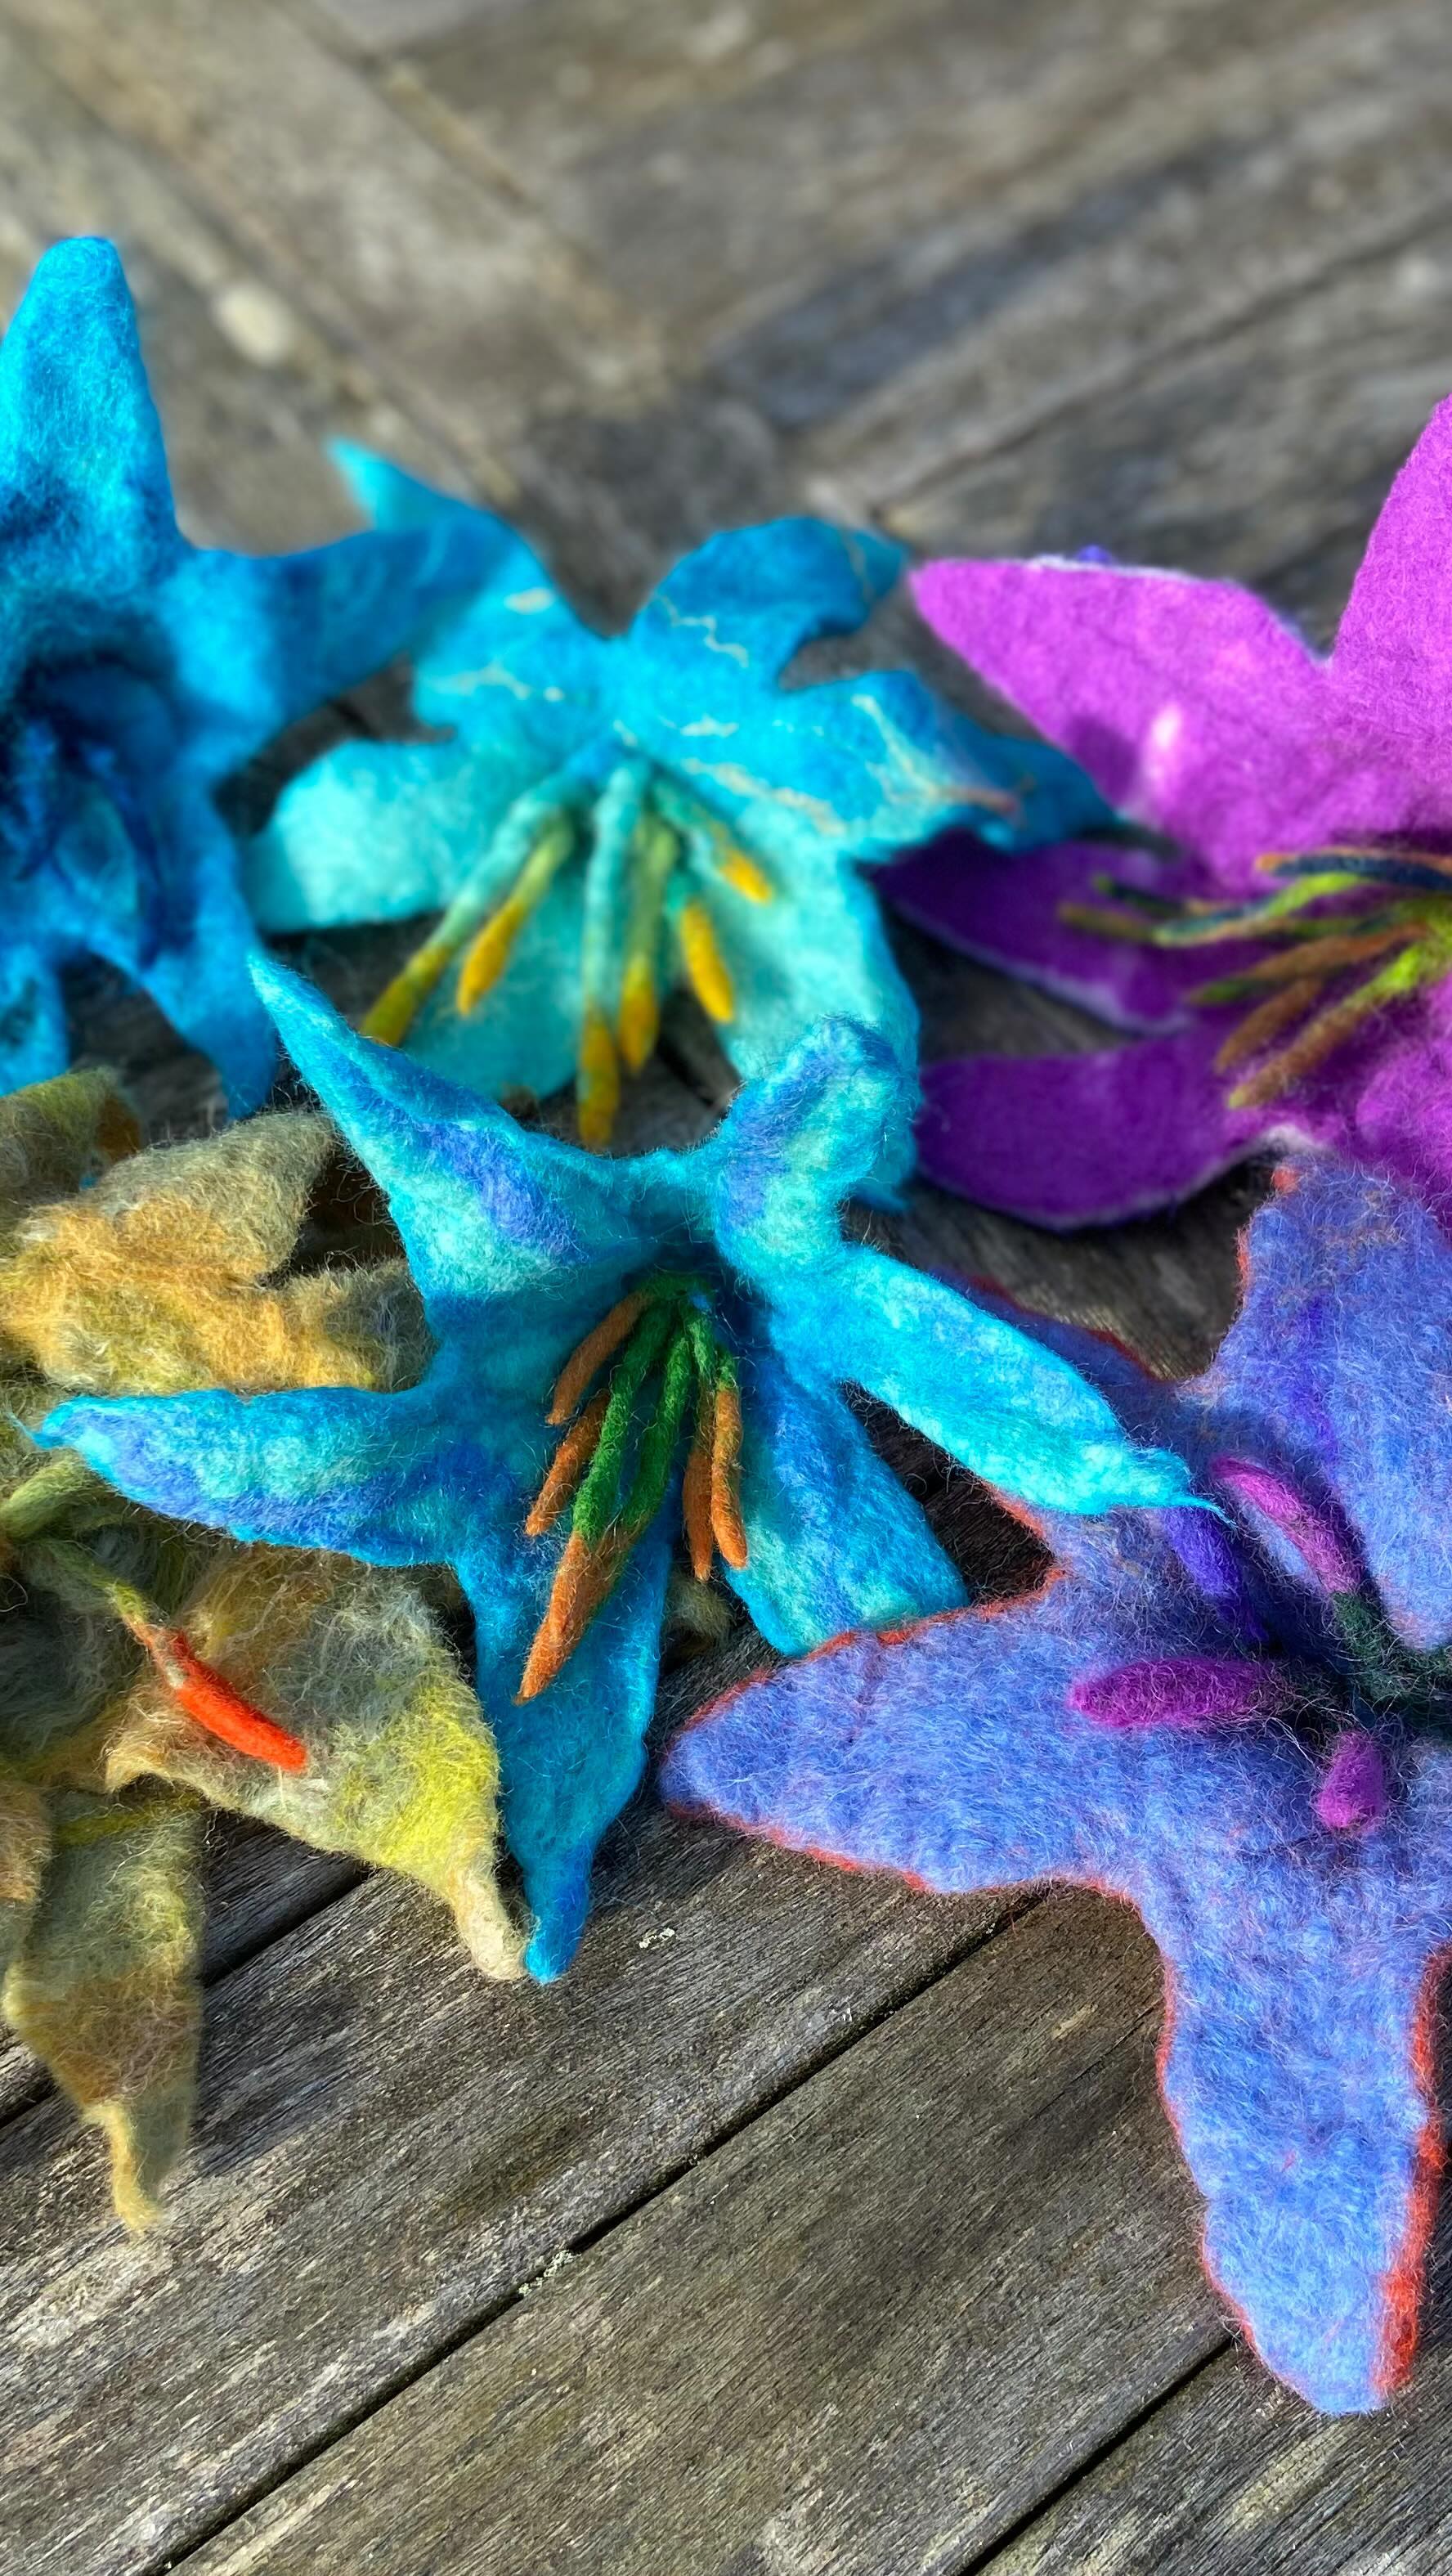 Handmade felt flower workshop with Mary Toon @bodruganbarton 
-
-
-
-
-
#feltlove #feltflowers #accessory #workshop #artretreat #soulgrowth #soulfood #feltmaking #flowersofinstagram #making #makingmemories #slowlife #timeout #metime💕 Check out link for up and coming workshops :)